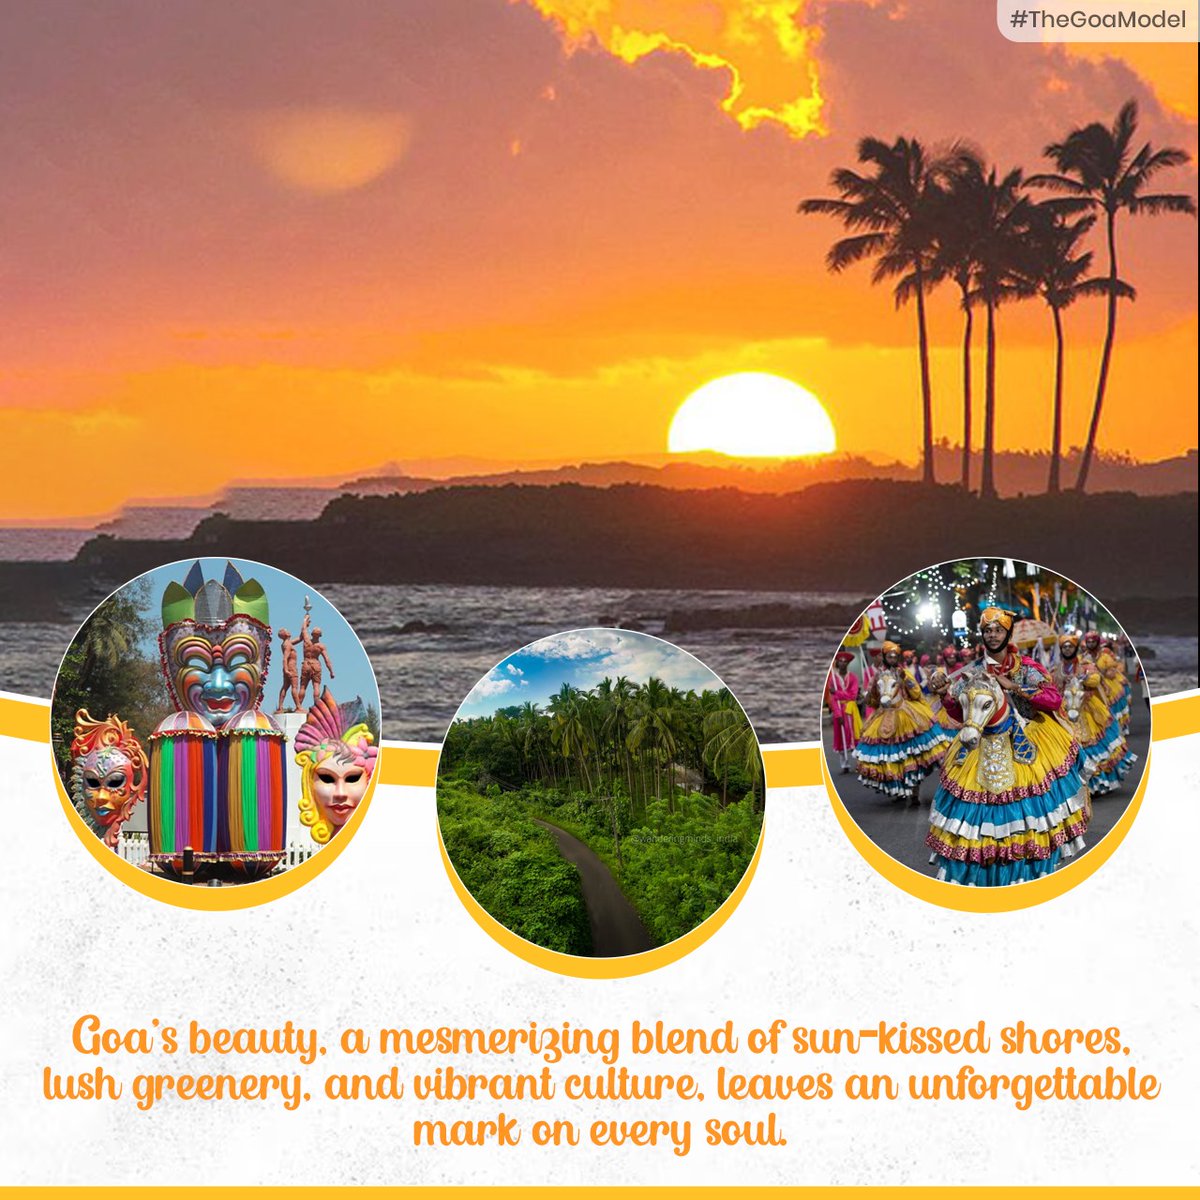 Goa's beauty, a mesmerizing blend of sun-kissed shores, lush greenery, and vibrant culture, leaves an unforgettable mark on every soul.
#TheGoaModel
#GoaBeauty  #LushGreenery #VibrantCulture #MesmerizingScenery #TropicalParadise #CoastalCharm #CulturalHeritage #SoulfulExperience